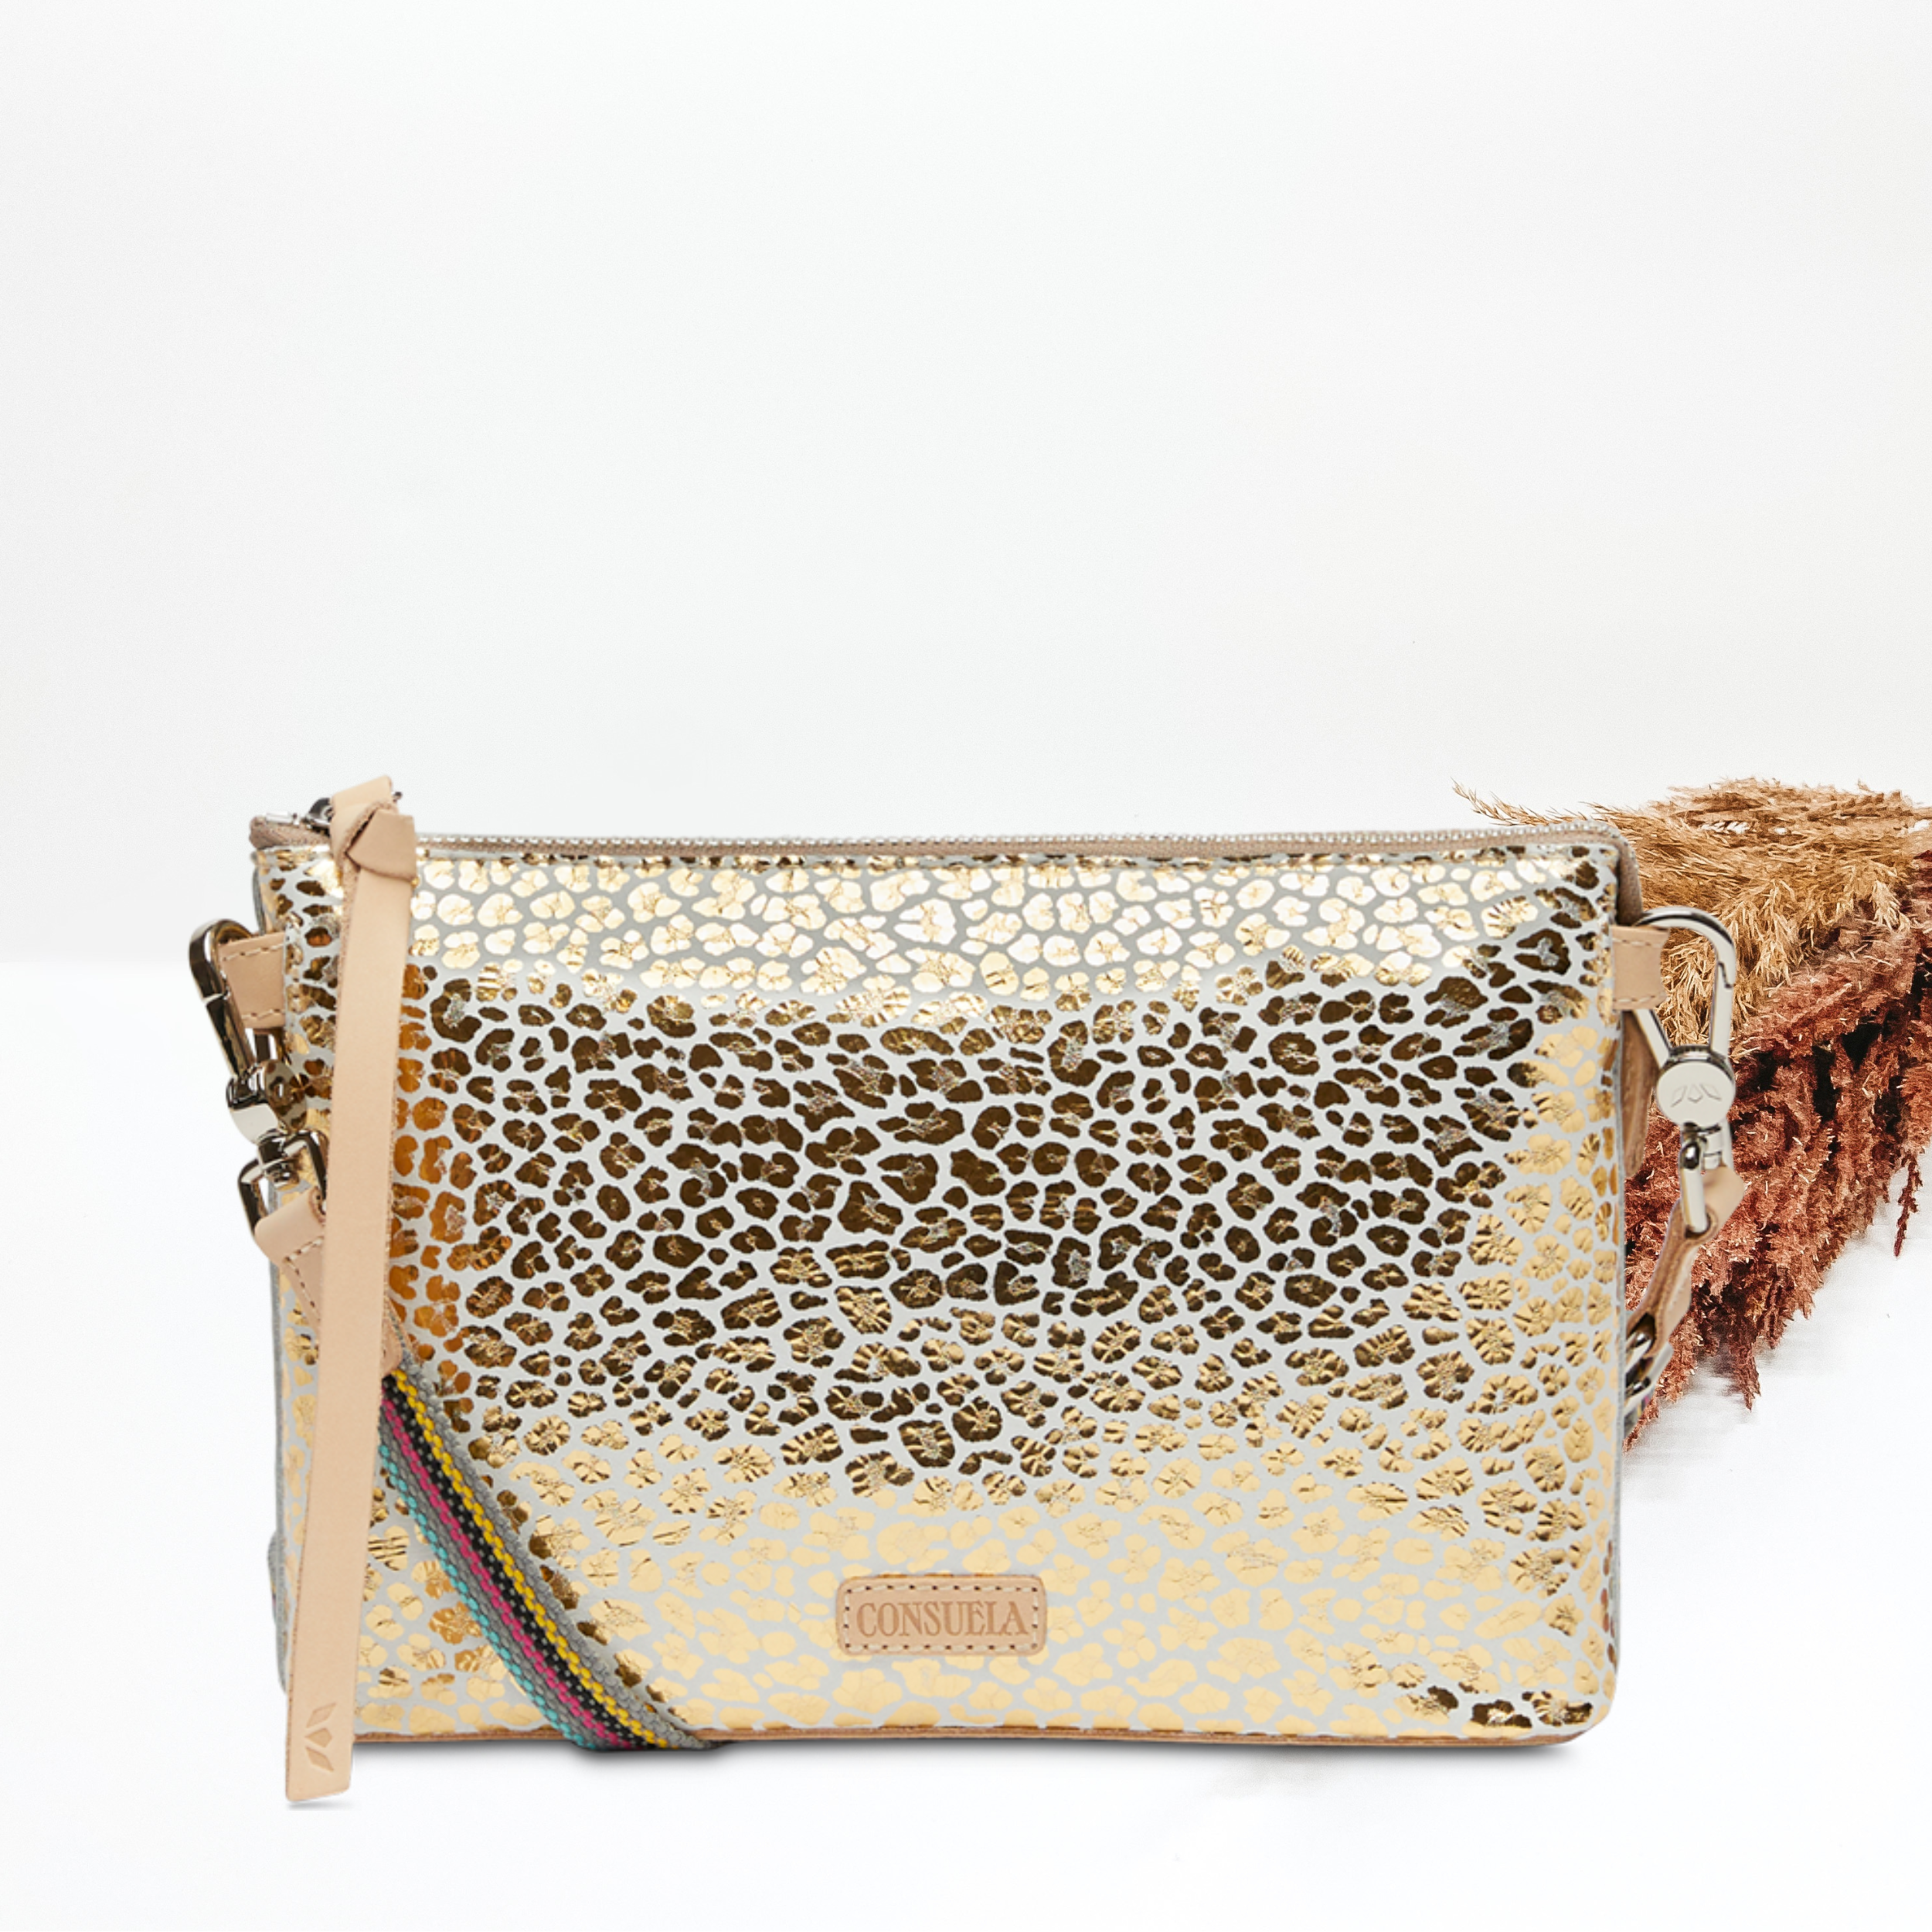 Pictured on a white background is a midtown corssbody purse with a light tan leather zipper pull on the top and a woven strap. This purse has a white with a metallic gold leopard print design. 